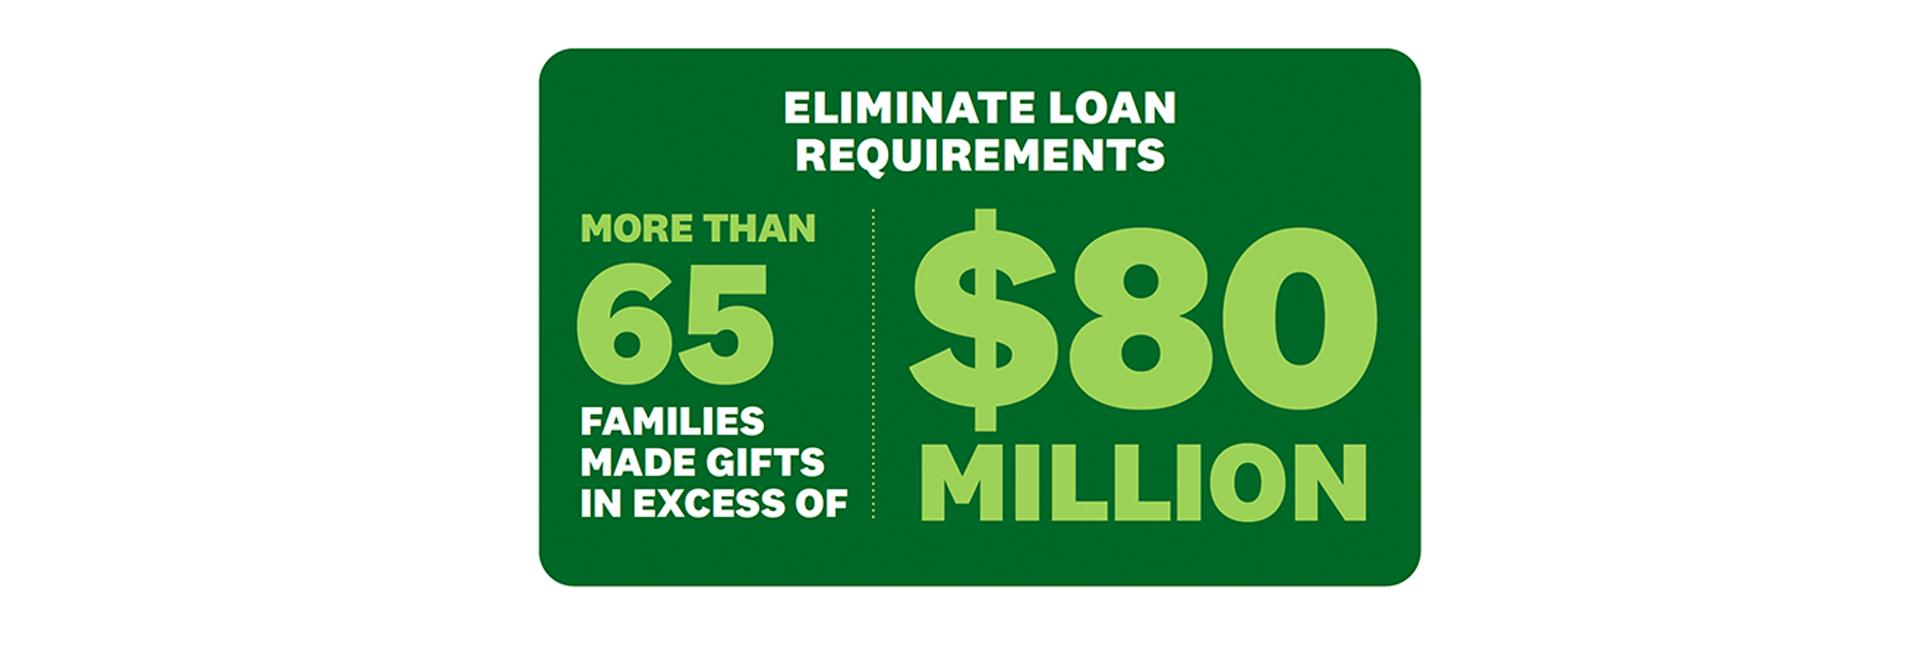 Eliminate loan requirements: More than 65 families made gifts in excess of $80 million